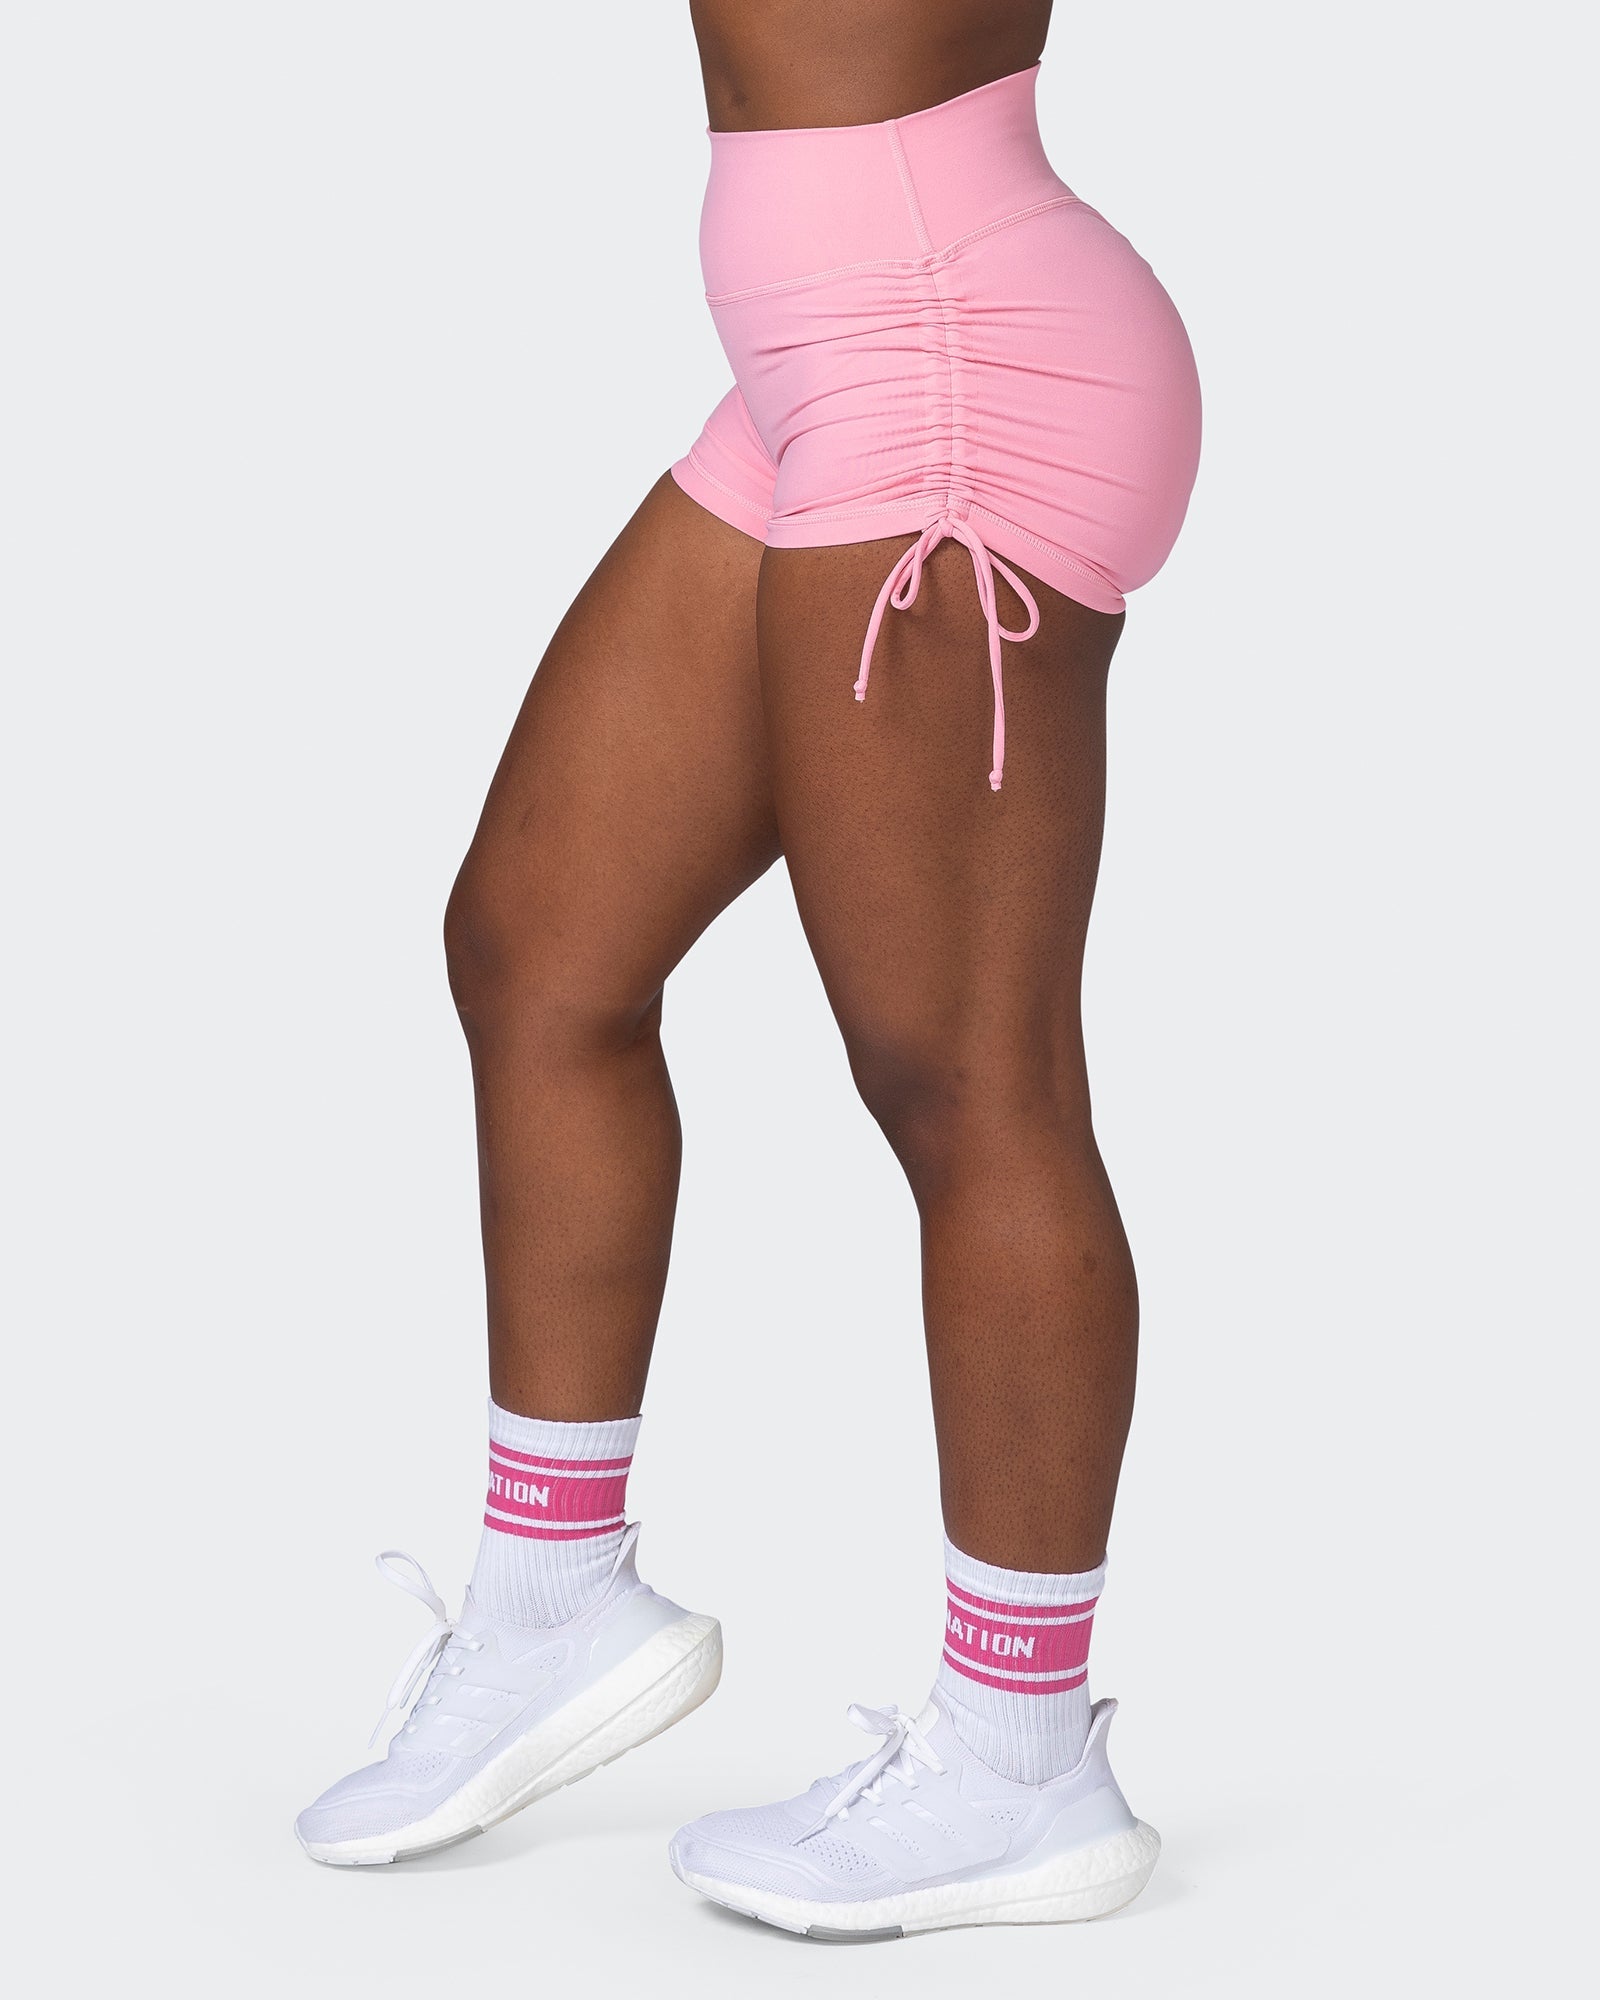 musclenation Shorts Signature Scrunch Tie Up Booty Shorts - Strawberry Pink